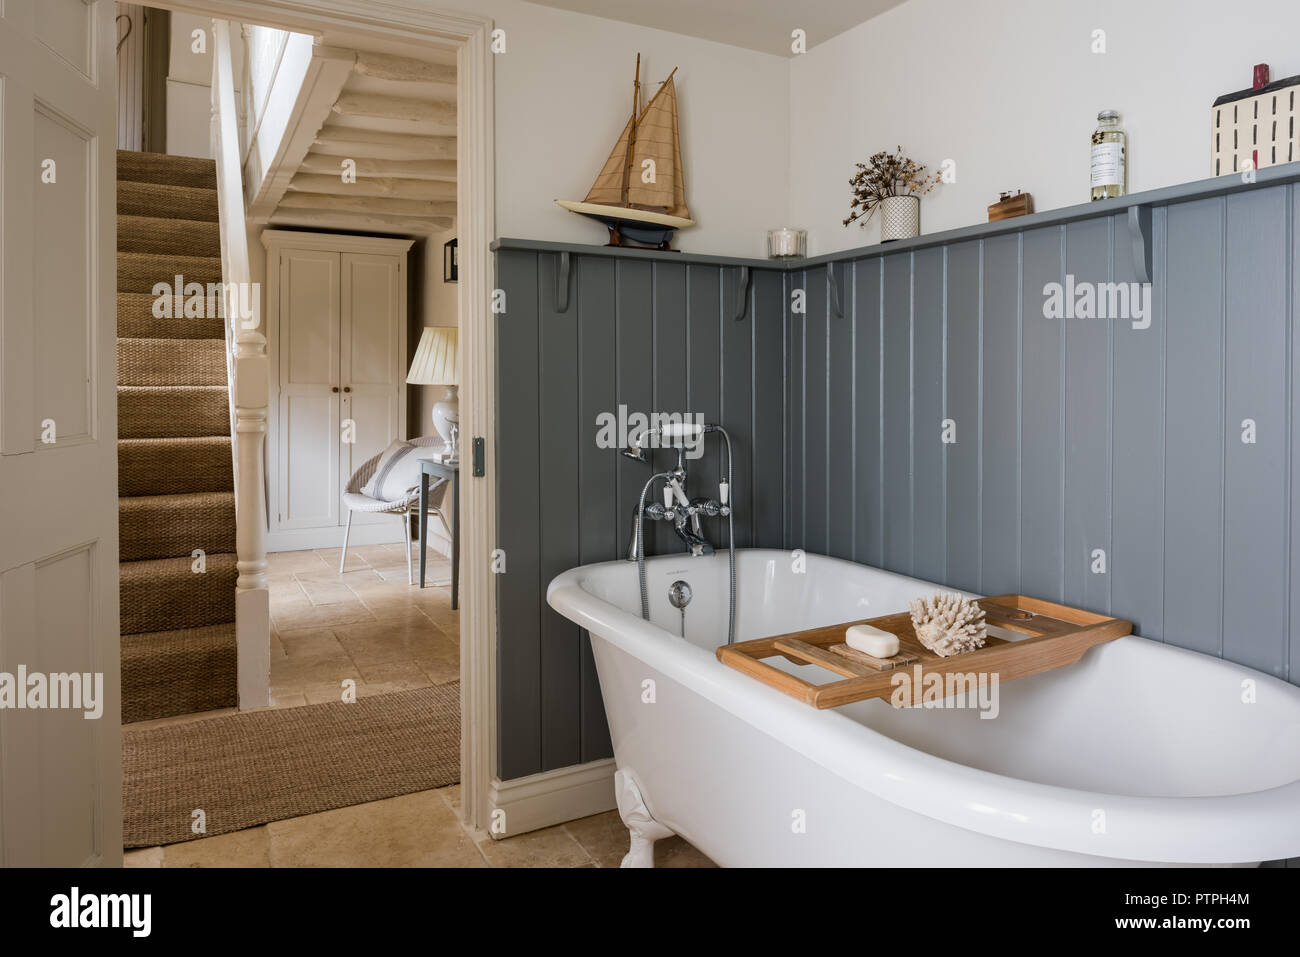 White freestanding bath with rack and ornaments on shelf in 18th century Norfolk cottage Stock Photo